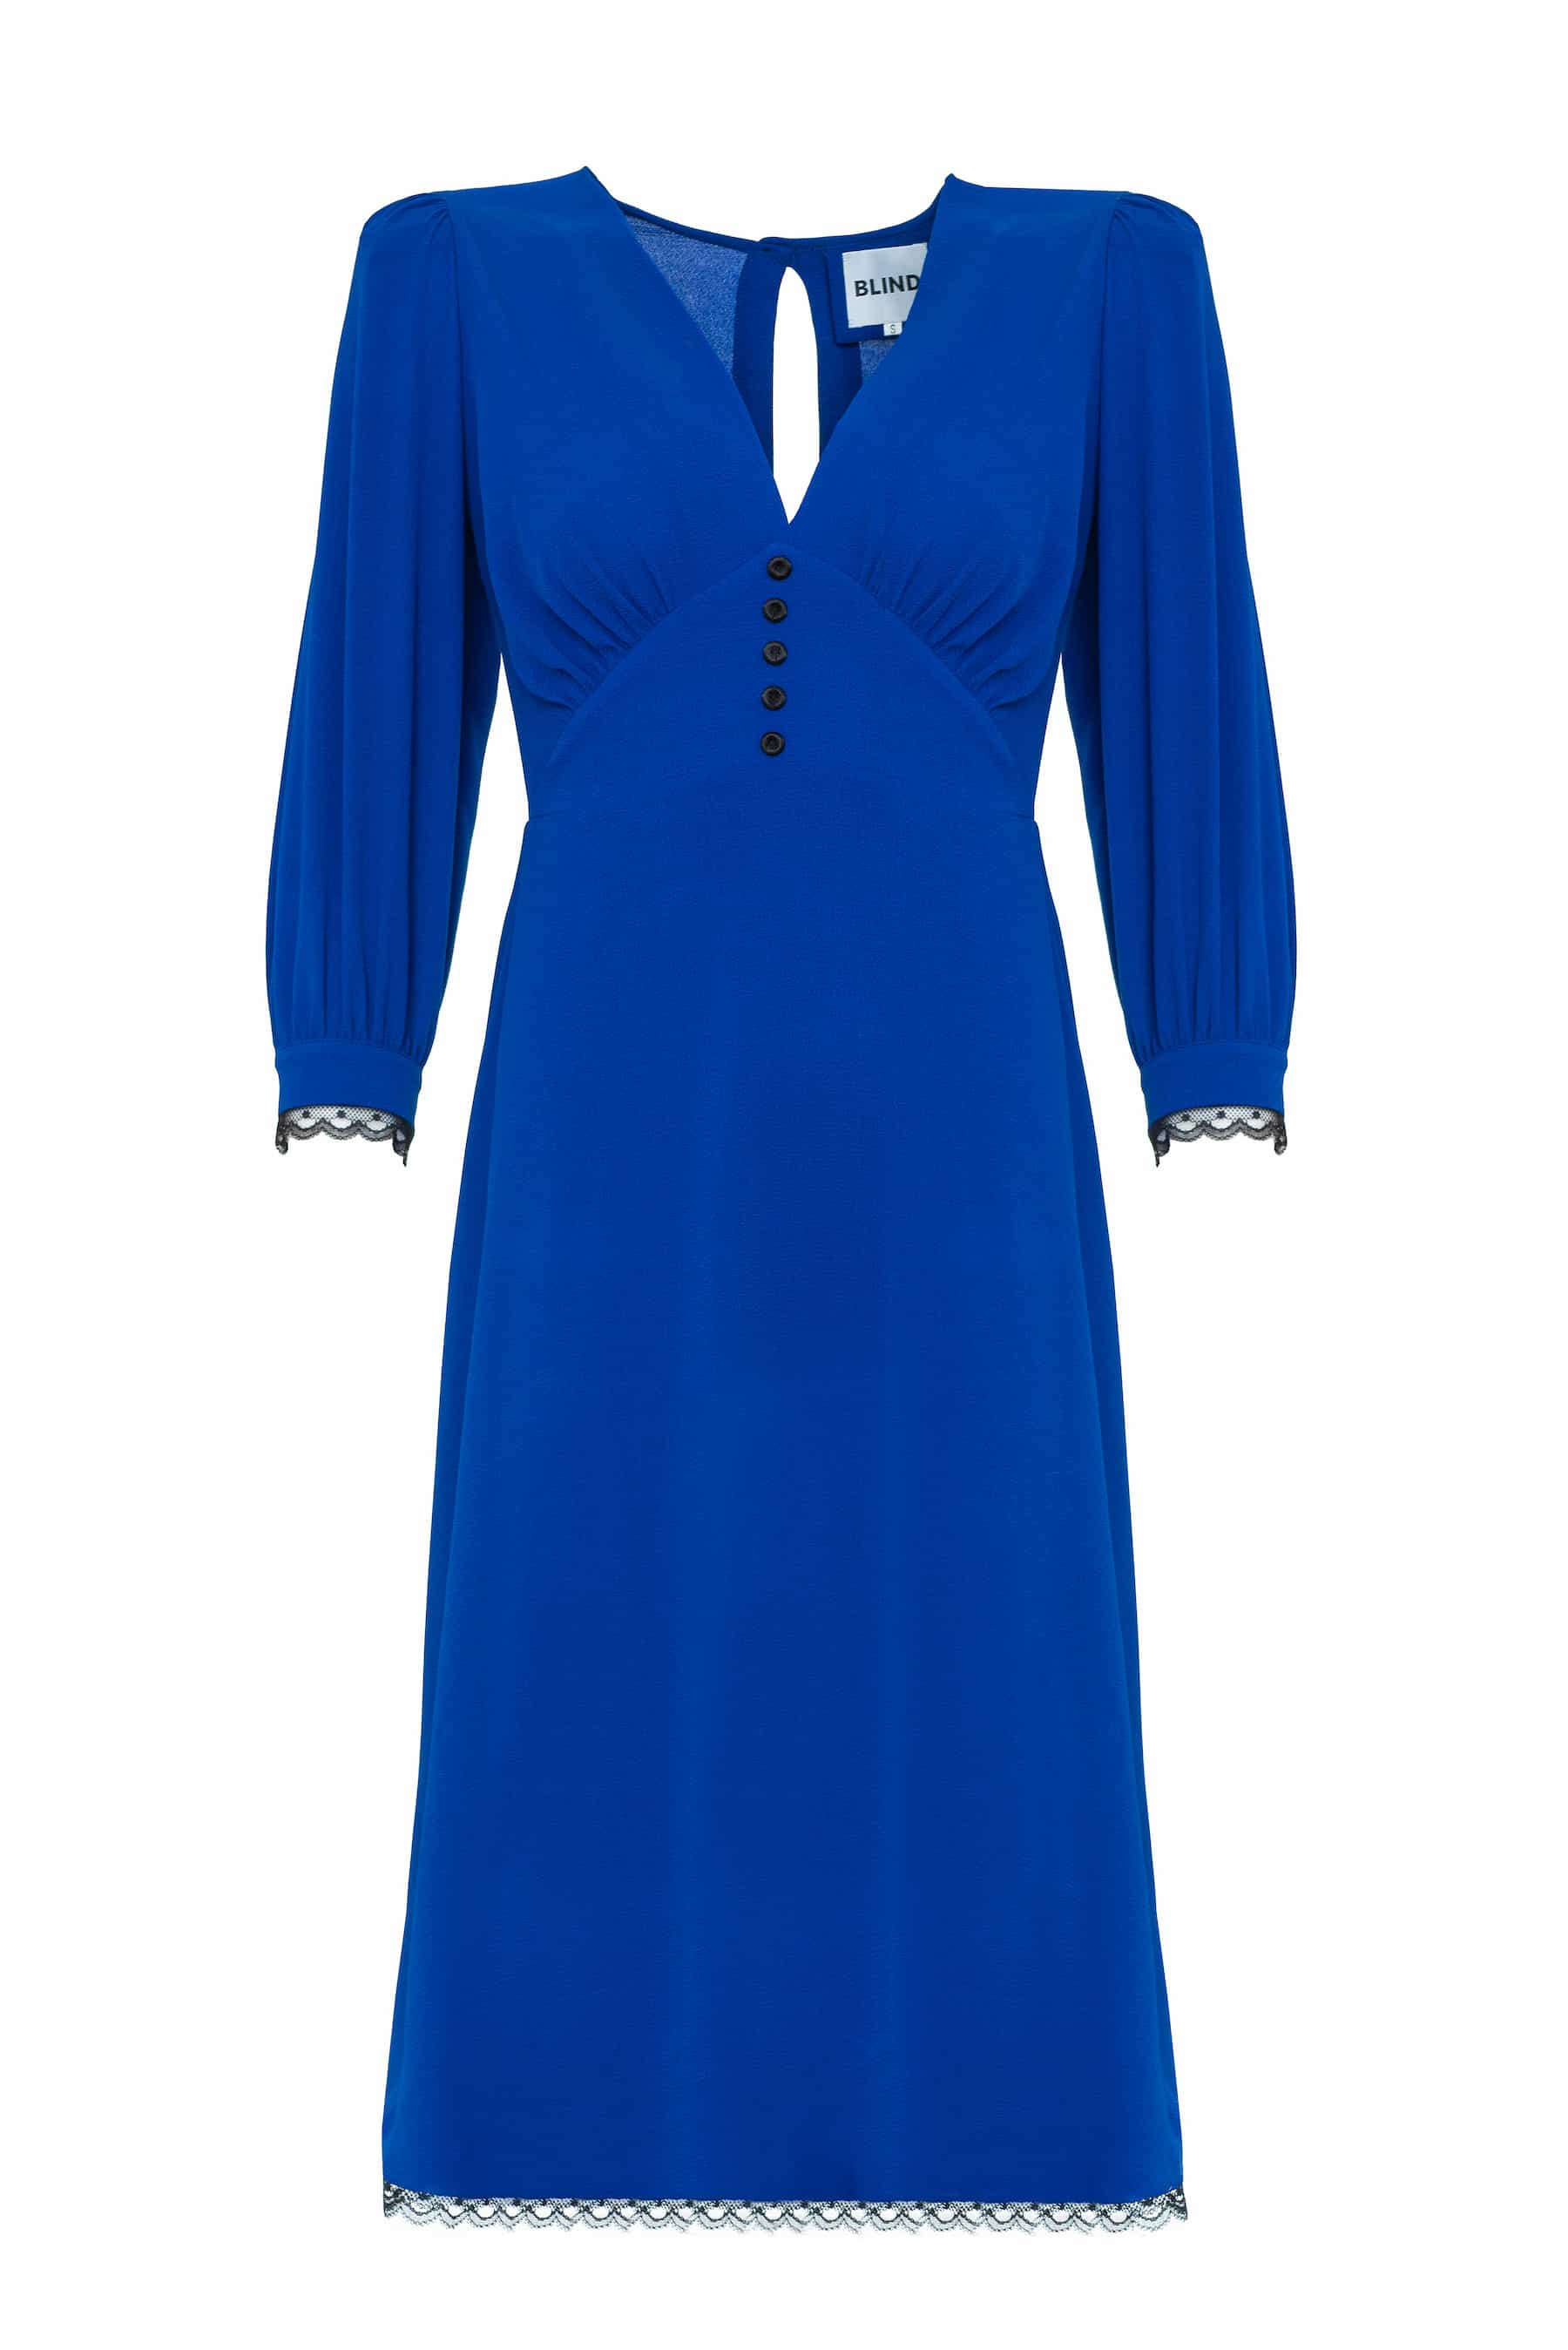 Electric blue crepe dress with black buttons and lace